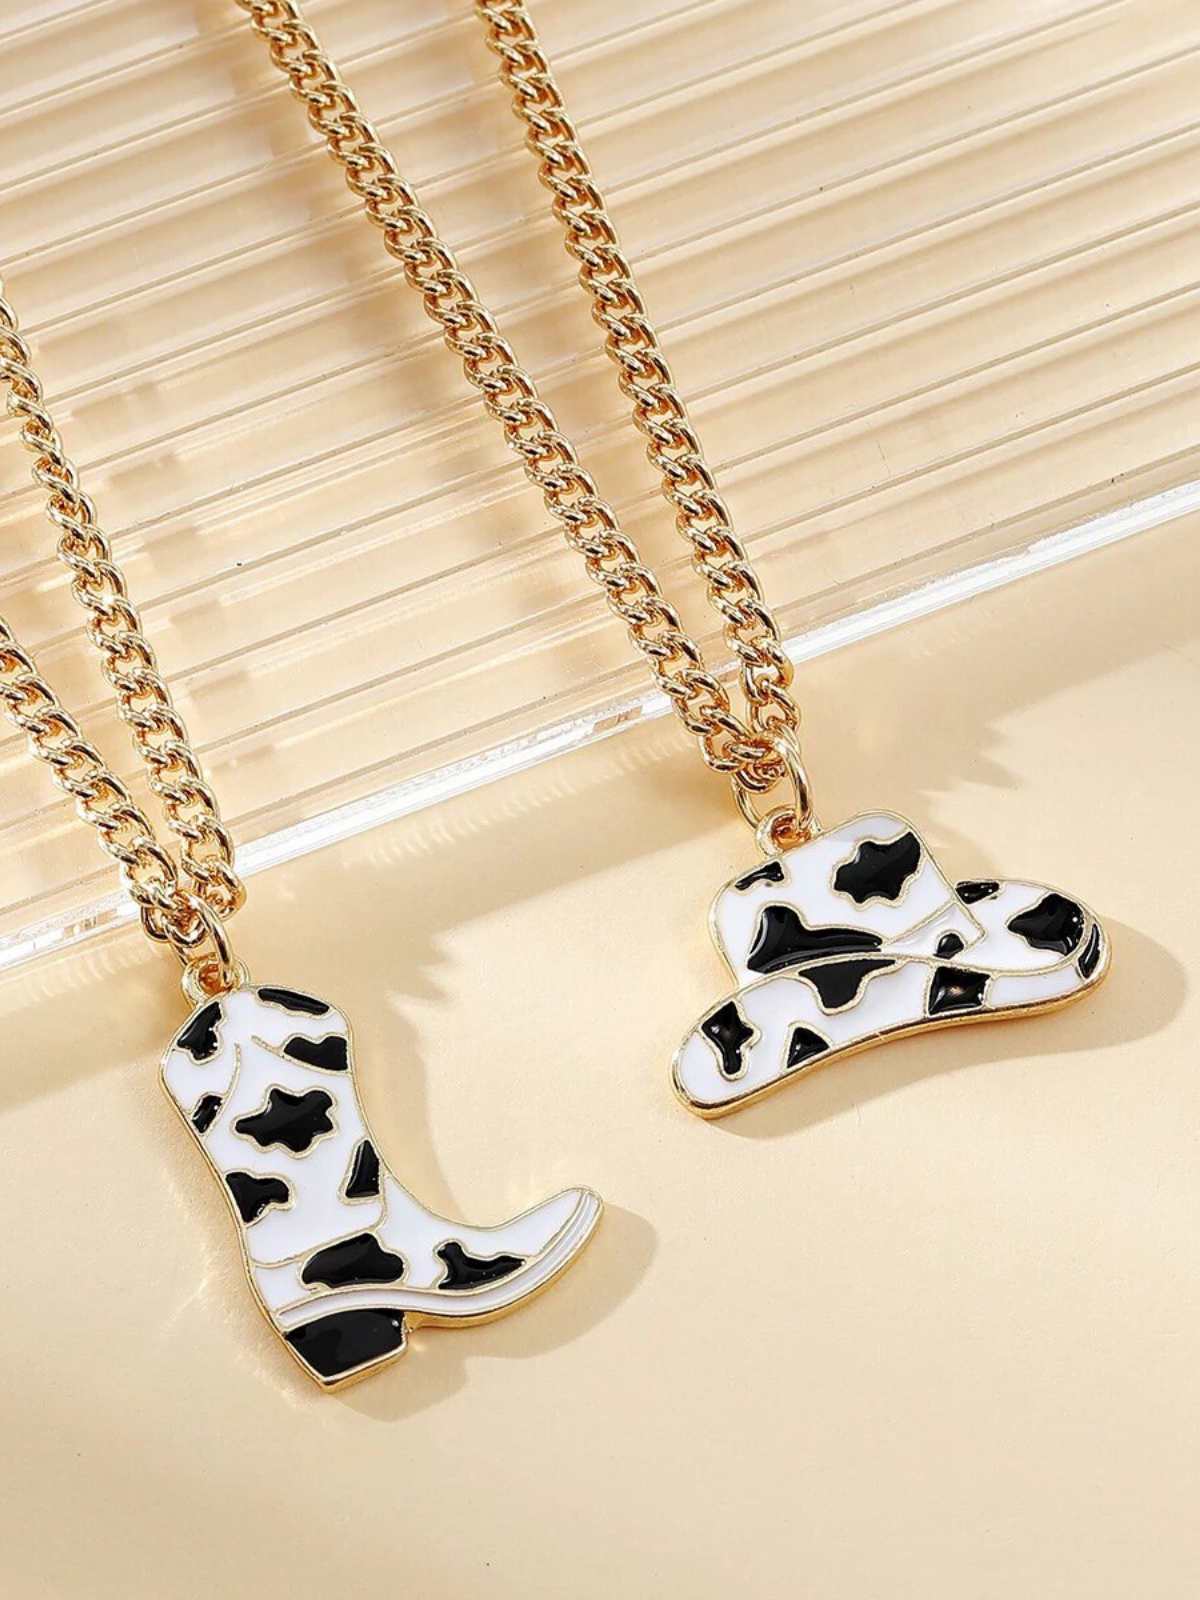 Bronco Beauty Cow Print Boot & Hat Cowgirl Necklace Set